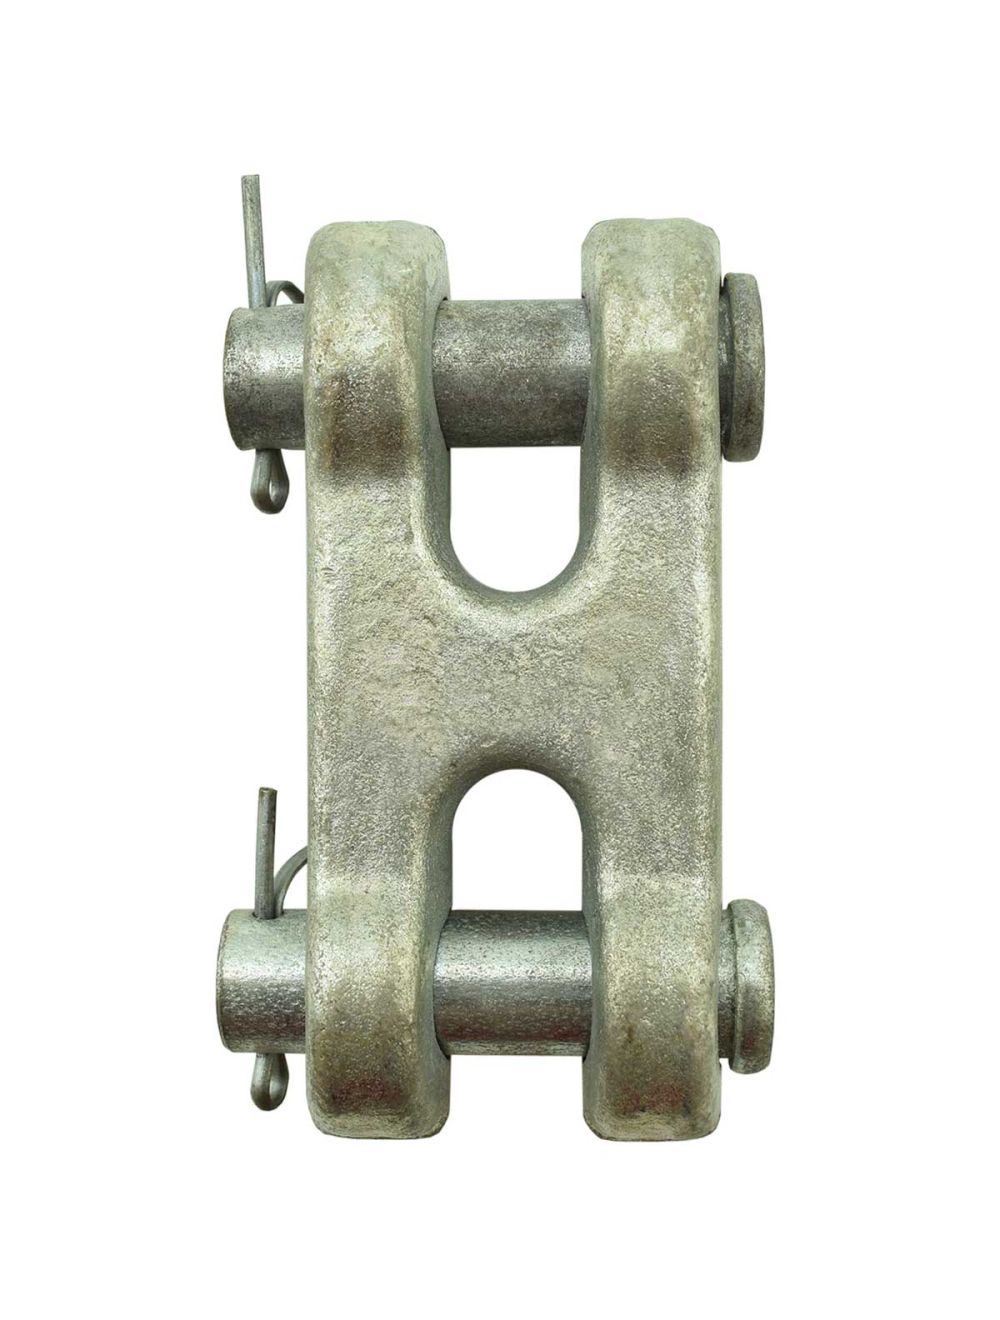 11-DC38-x6 BA Products 3/8 Double Clevis Grade 70 Chain Connector Master Link 6 Coupling Link 